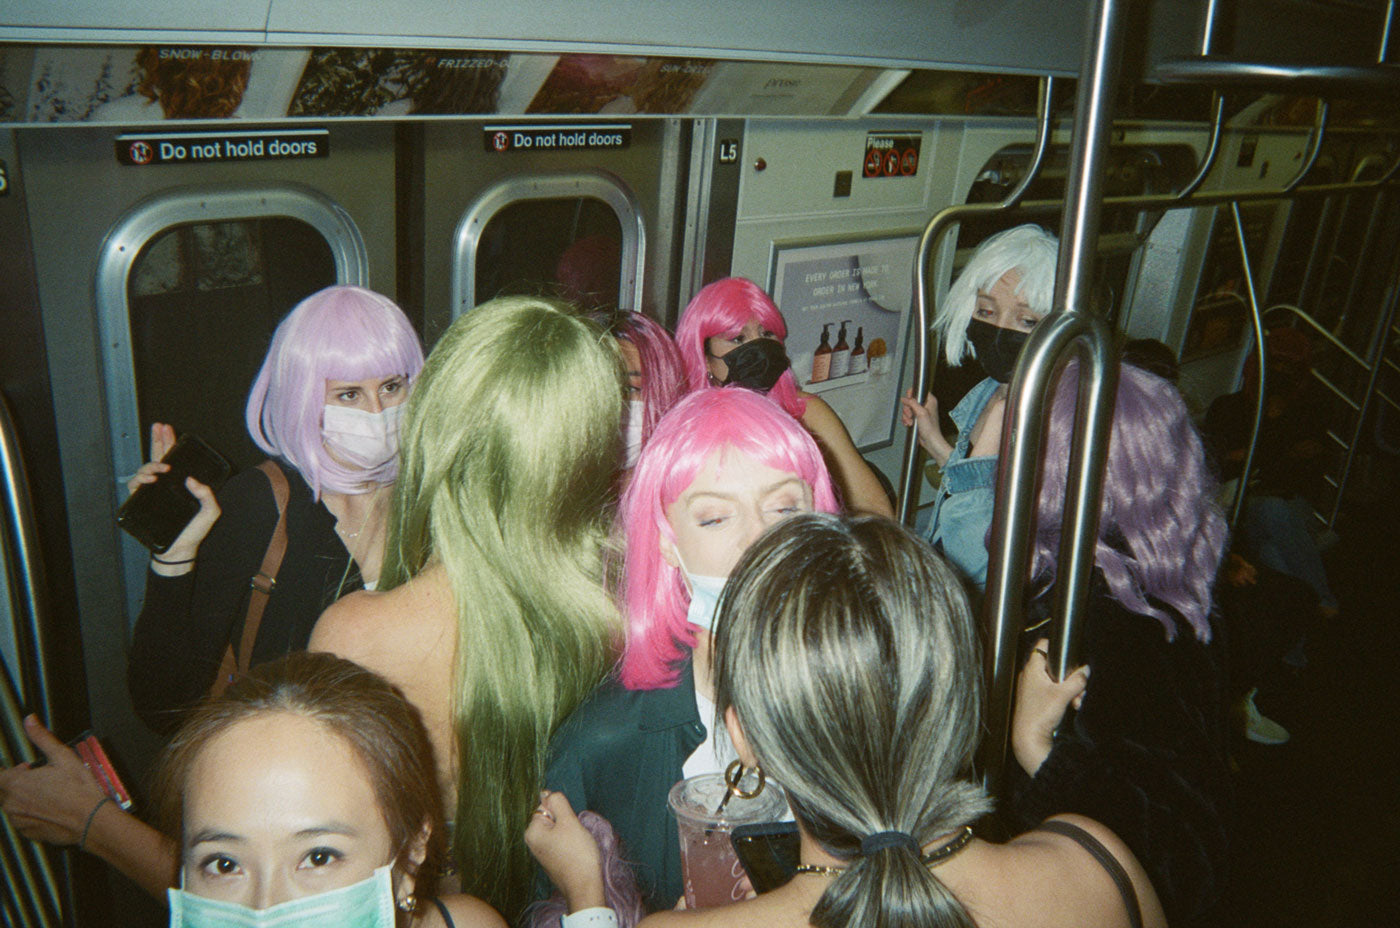 Photograph taken on subway of people wearing colorful wigs